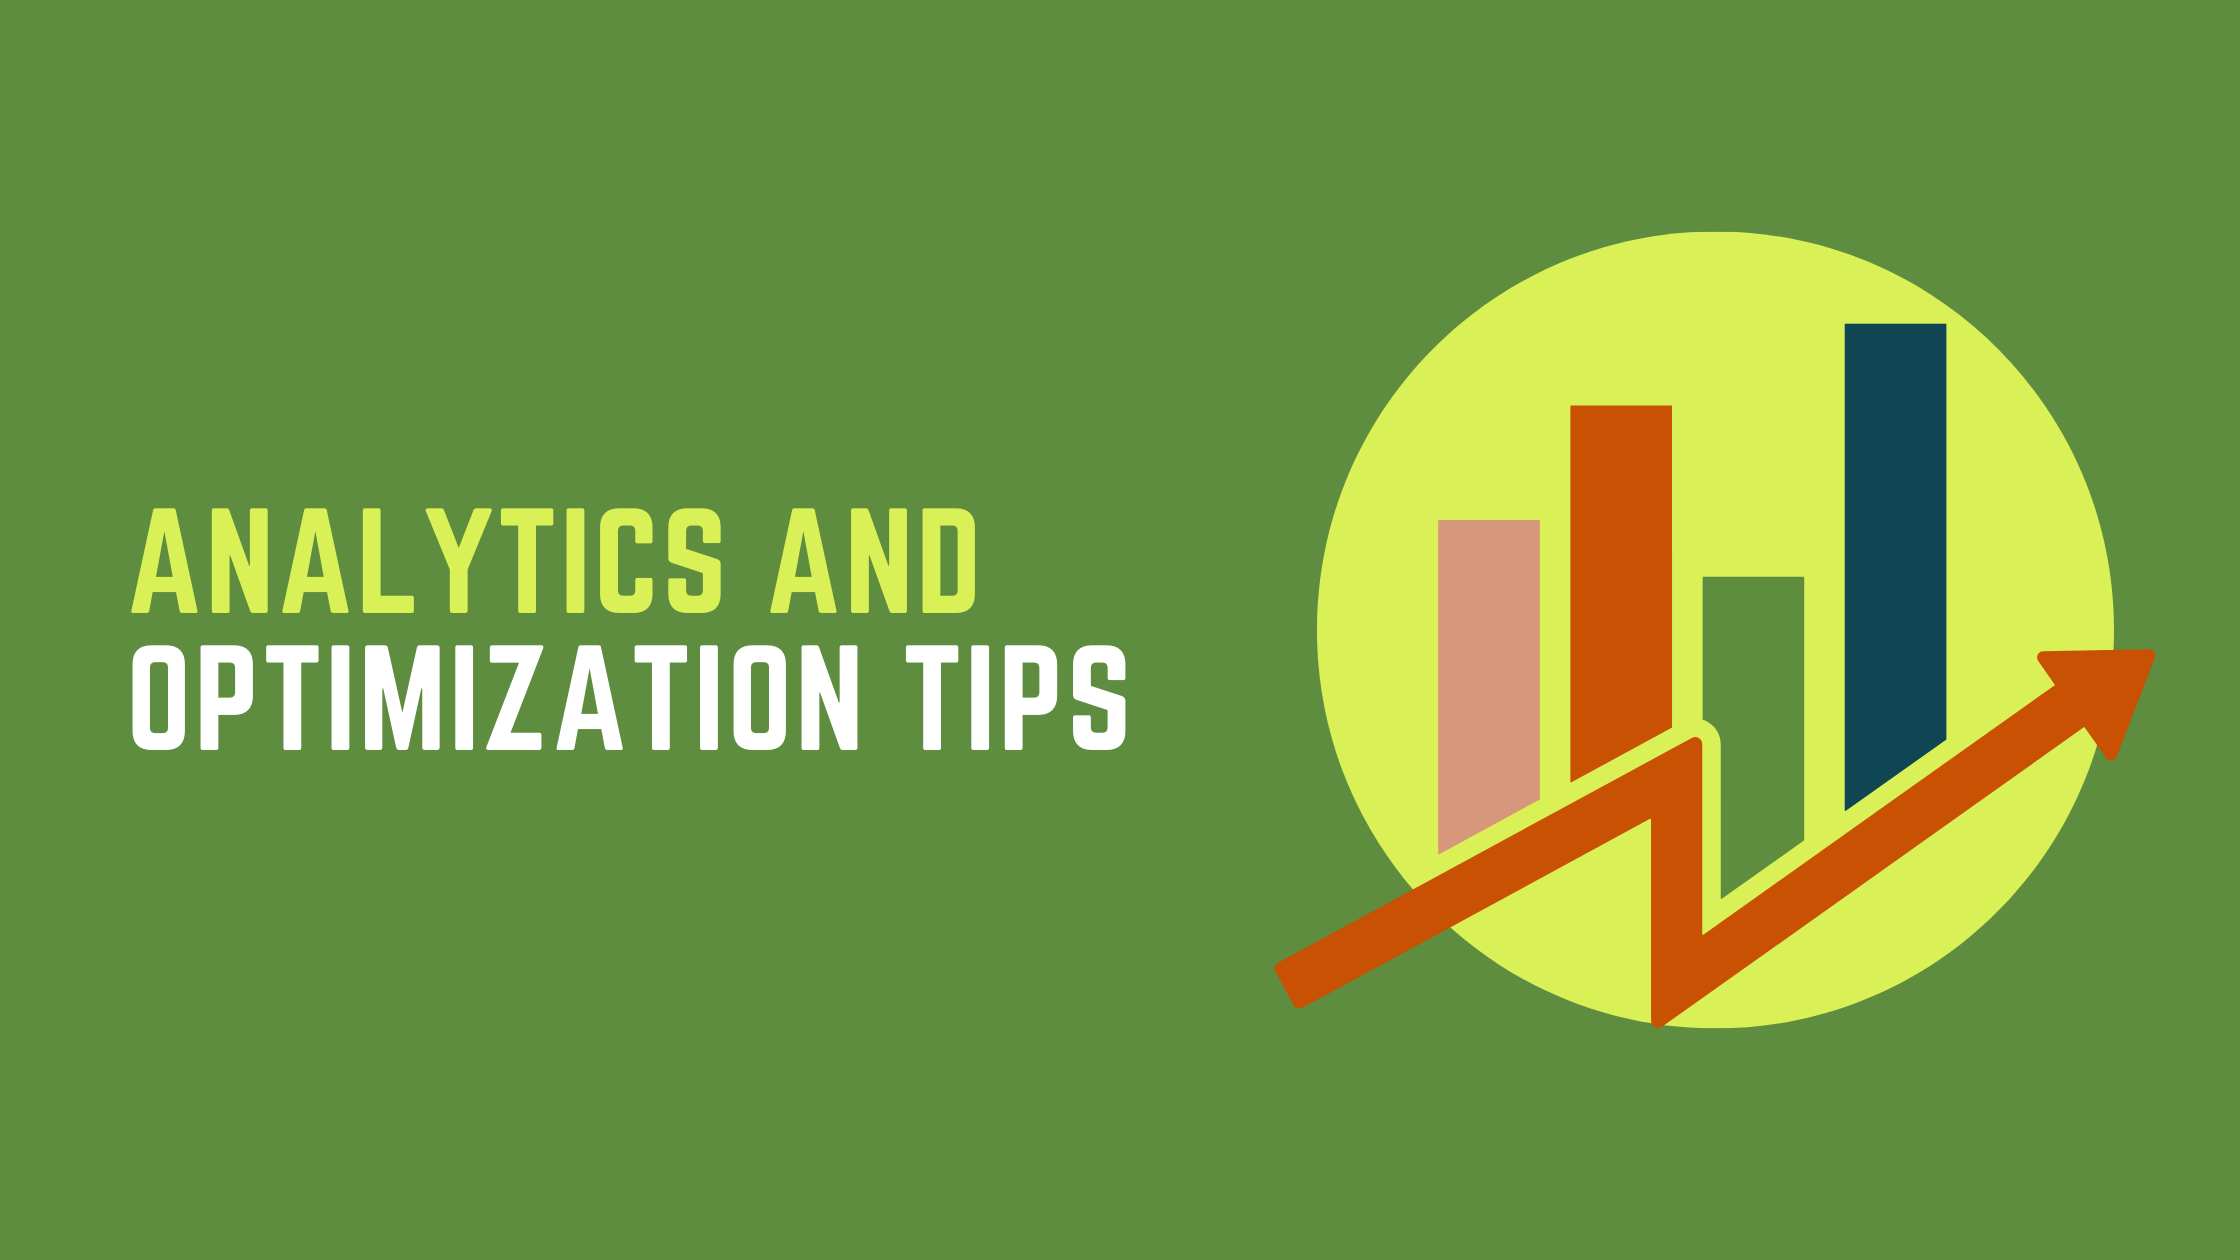 Tips to maximize your Shopify store's performance with analytics and optimization